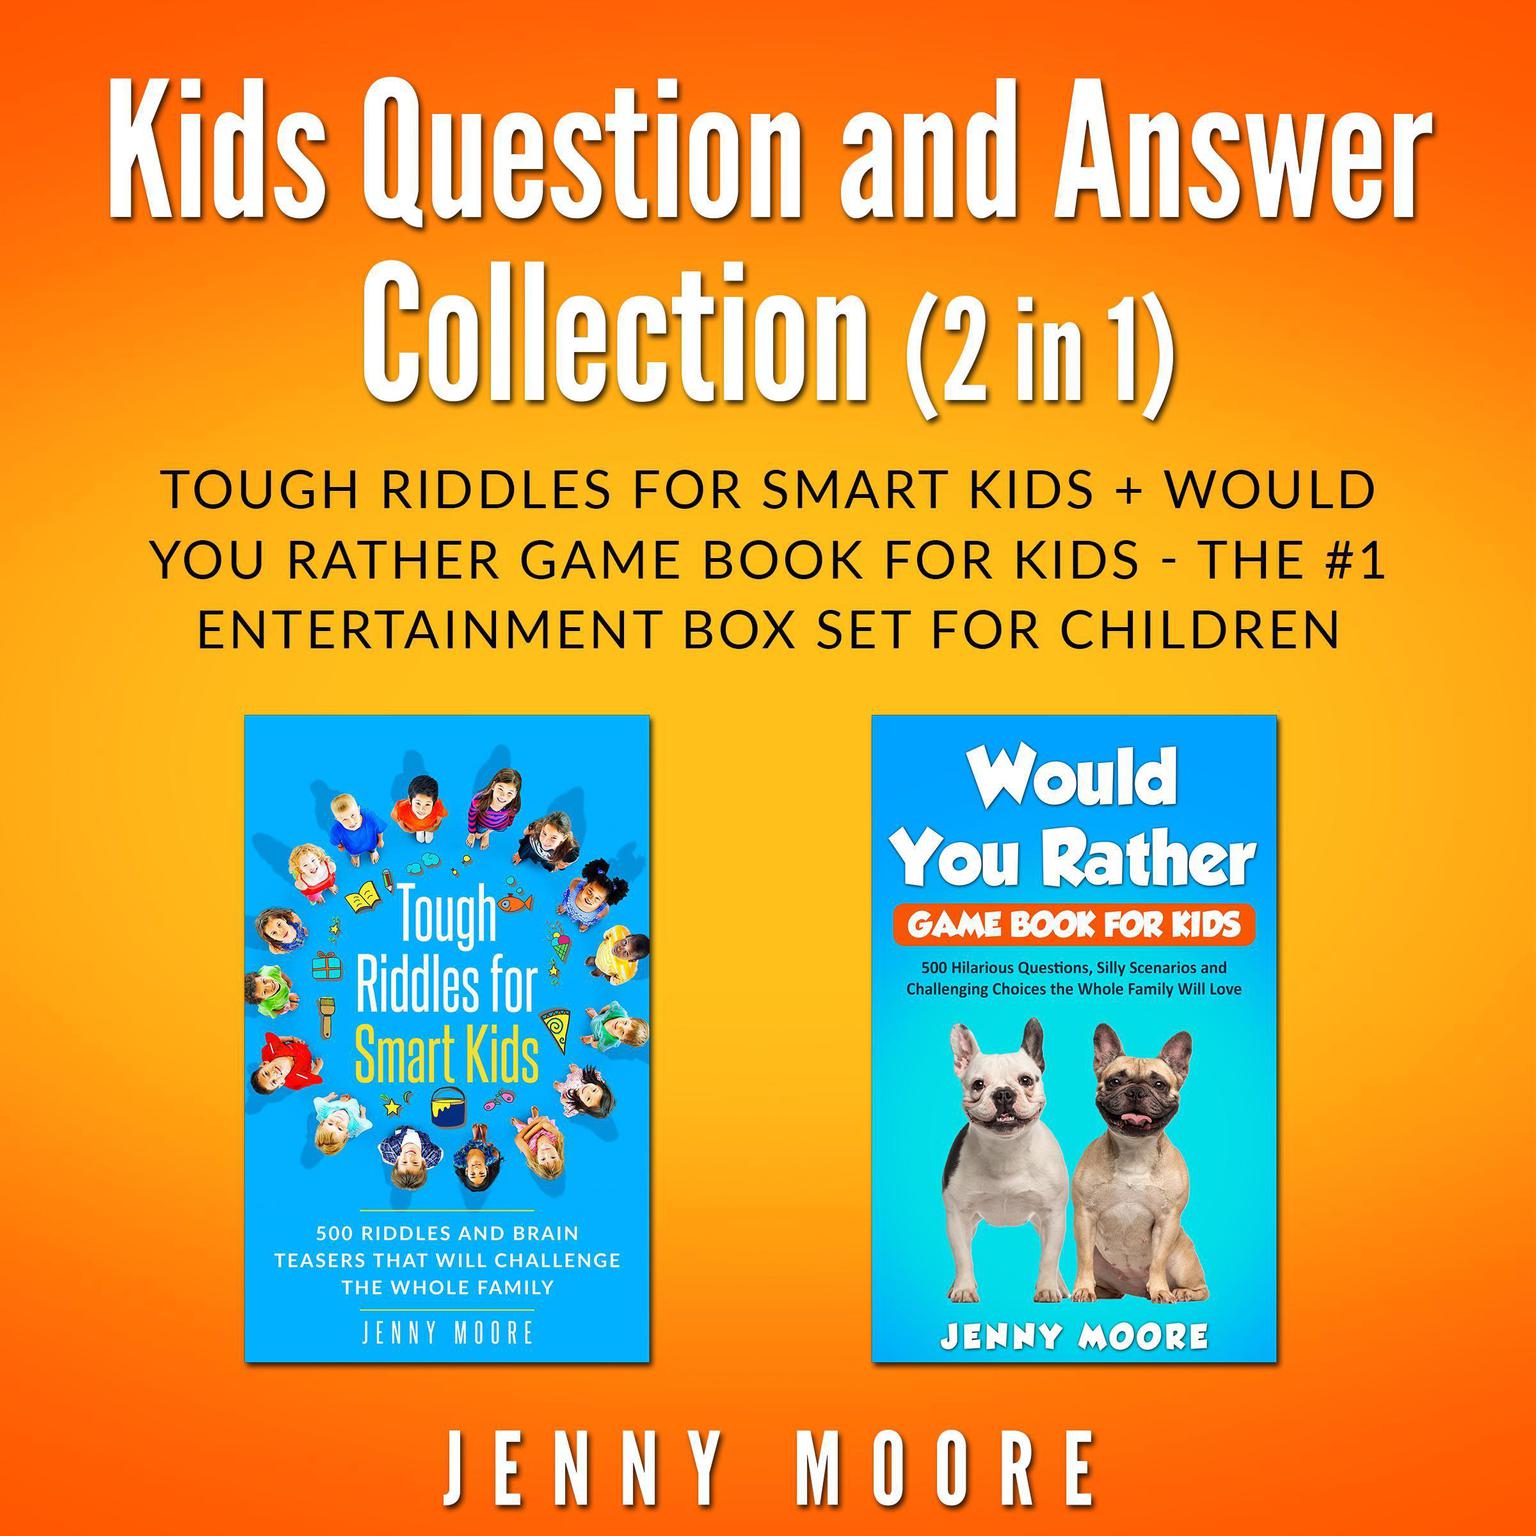 Kids Question and Answer Collection (2 in 1): Tough Riddles for Smart Kids + Would You Rather Game Book for Kids - The #1 Entertainment Box Set for Children Audiobook, by Jenny Moore